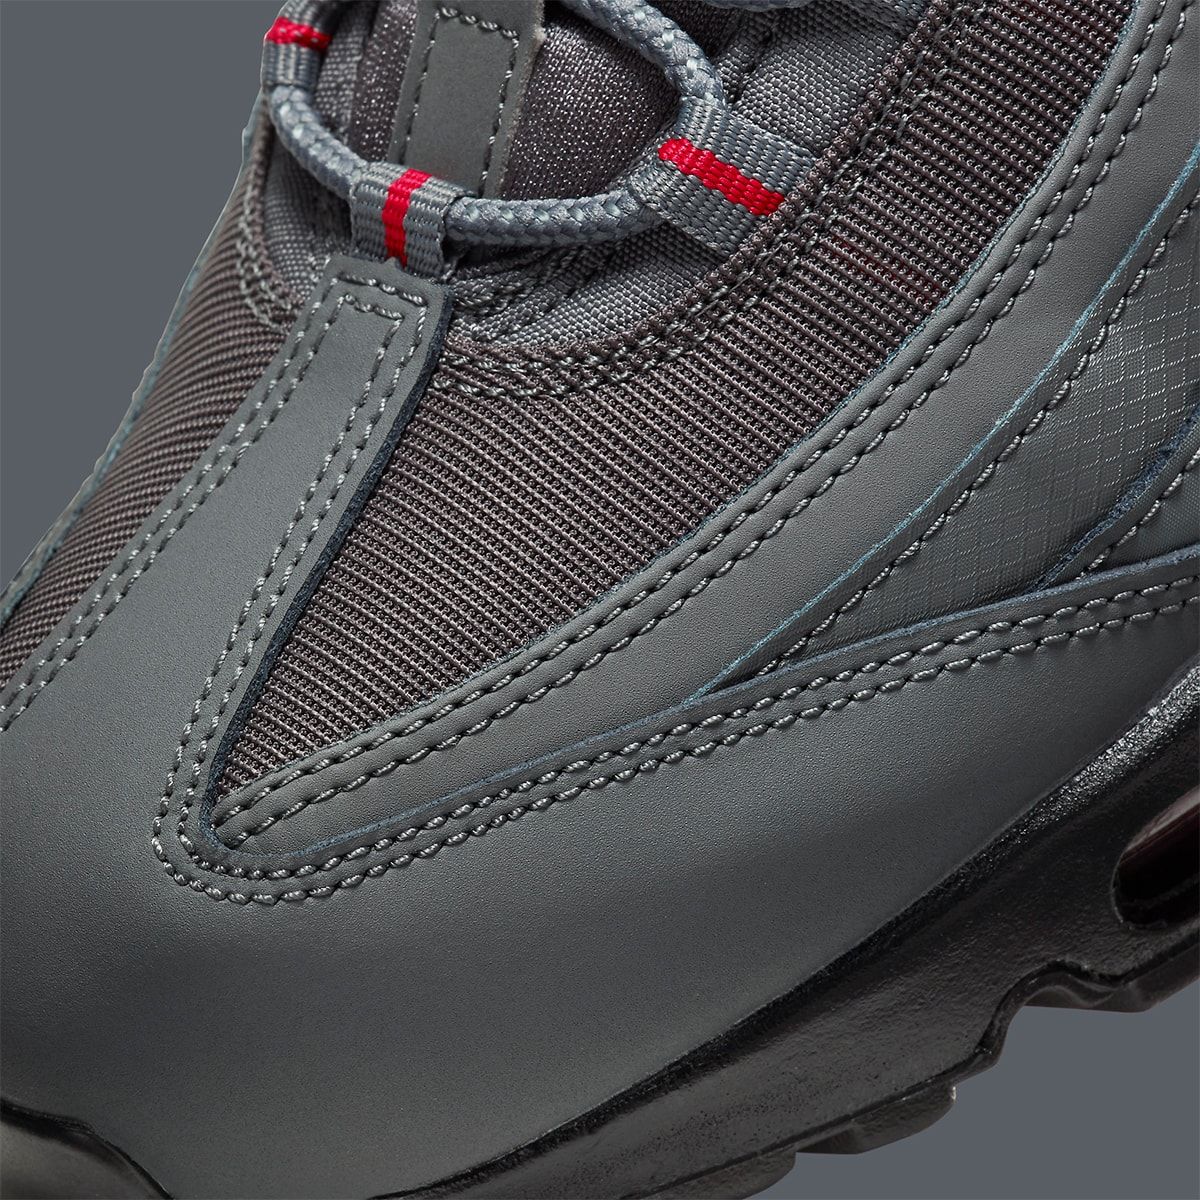 New Air Max 95 Gears-Up in Grey and Red - HOUSE OF HEAT ...